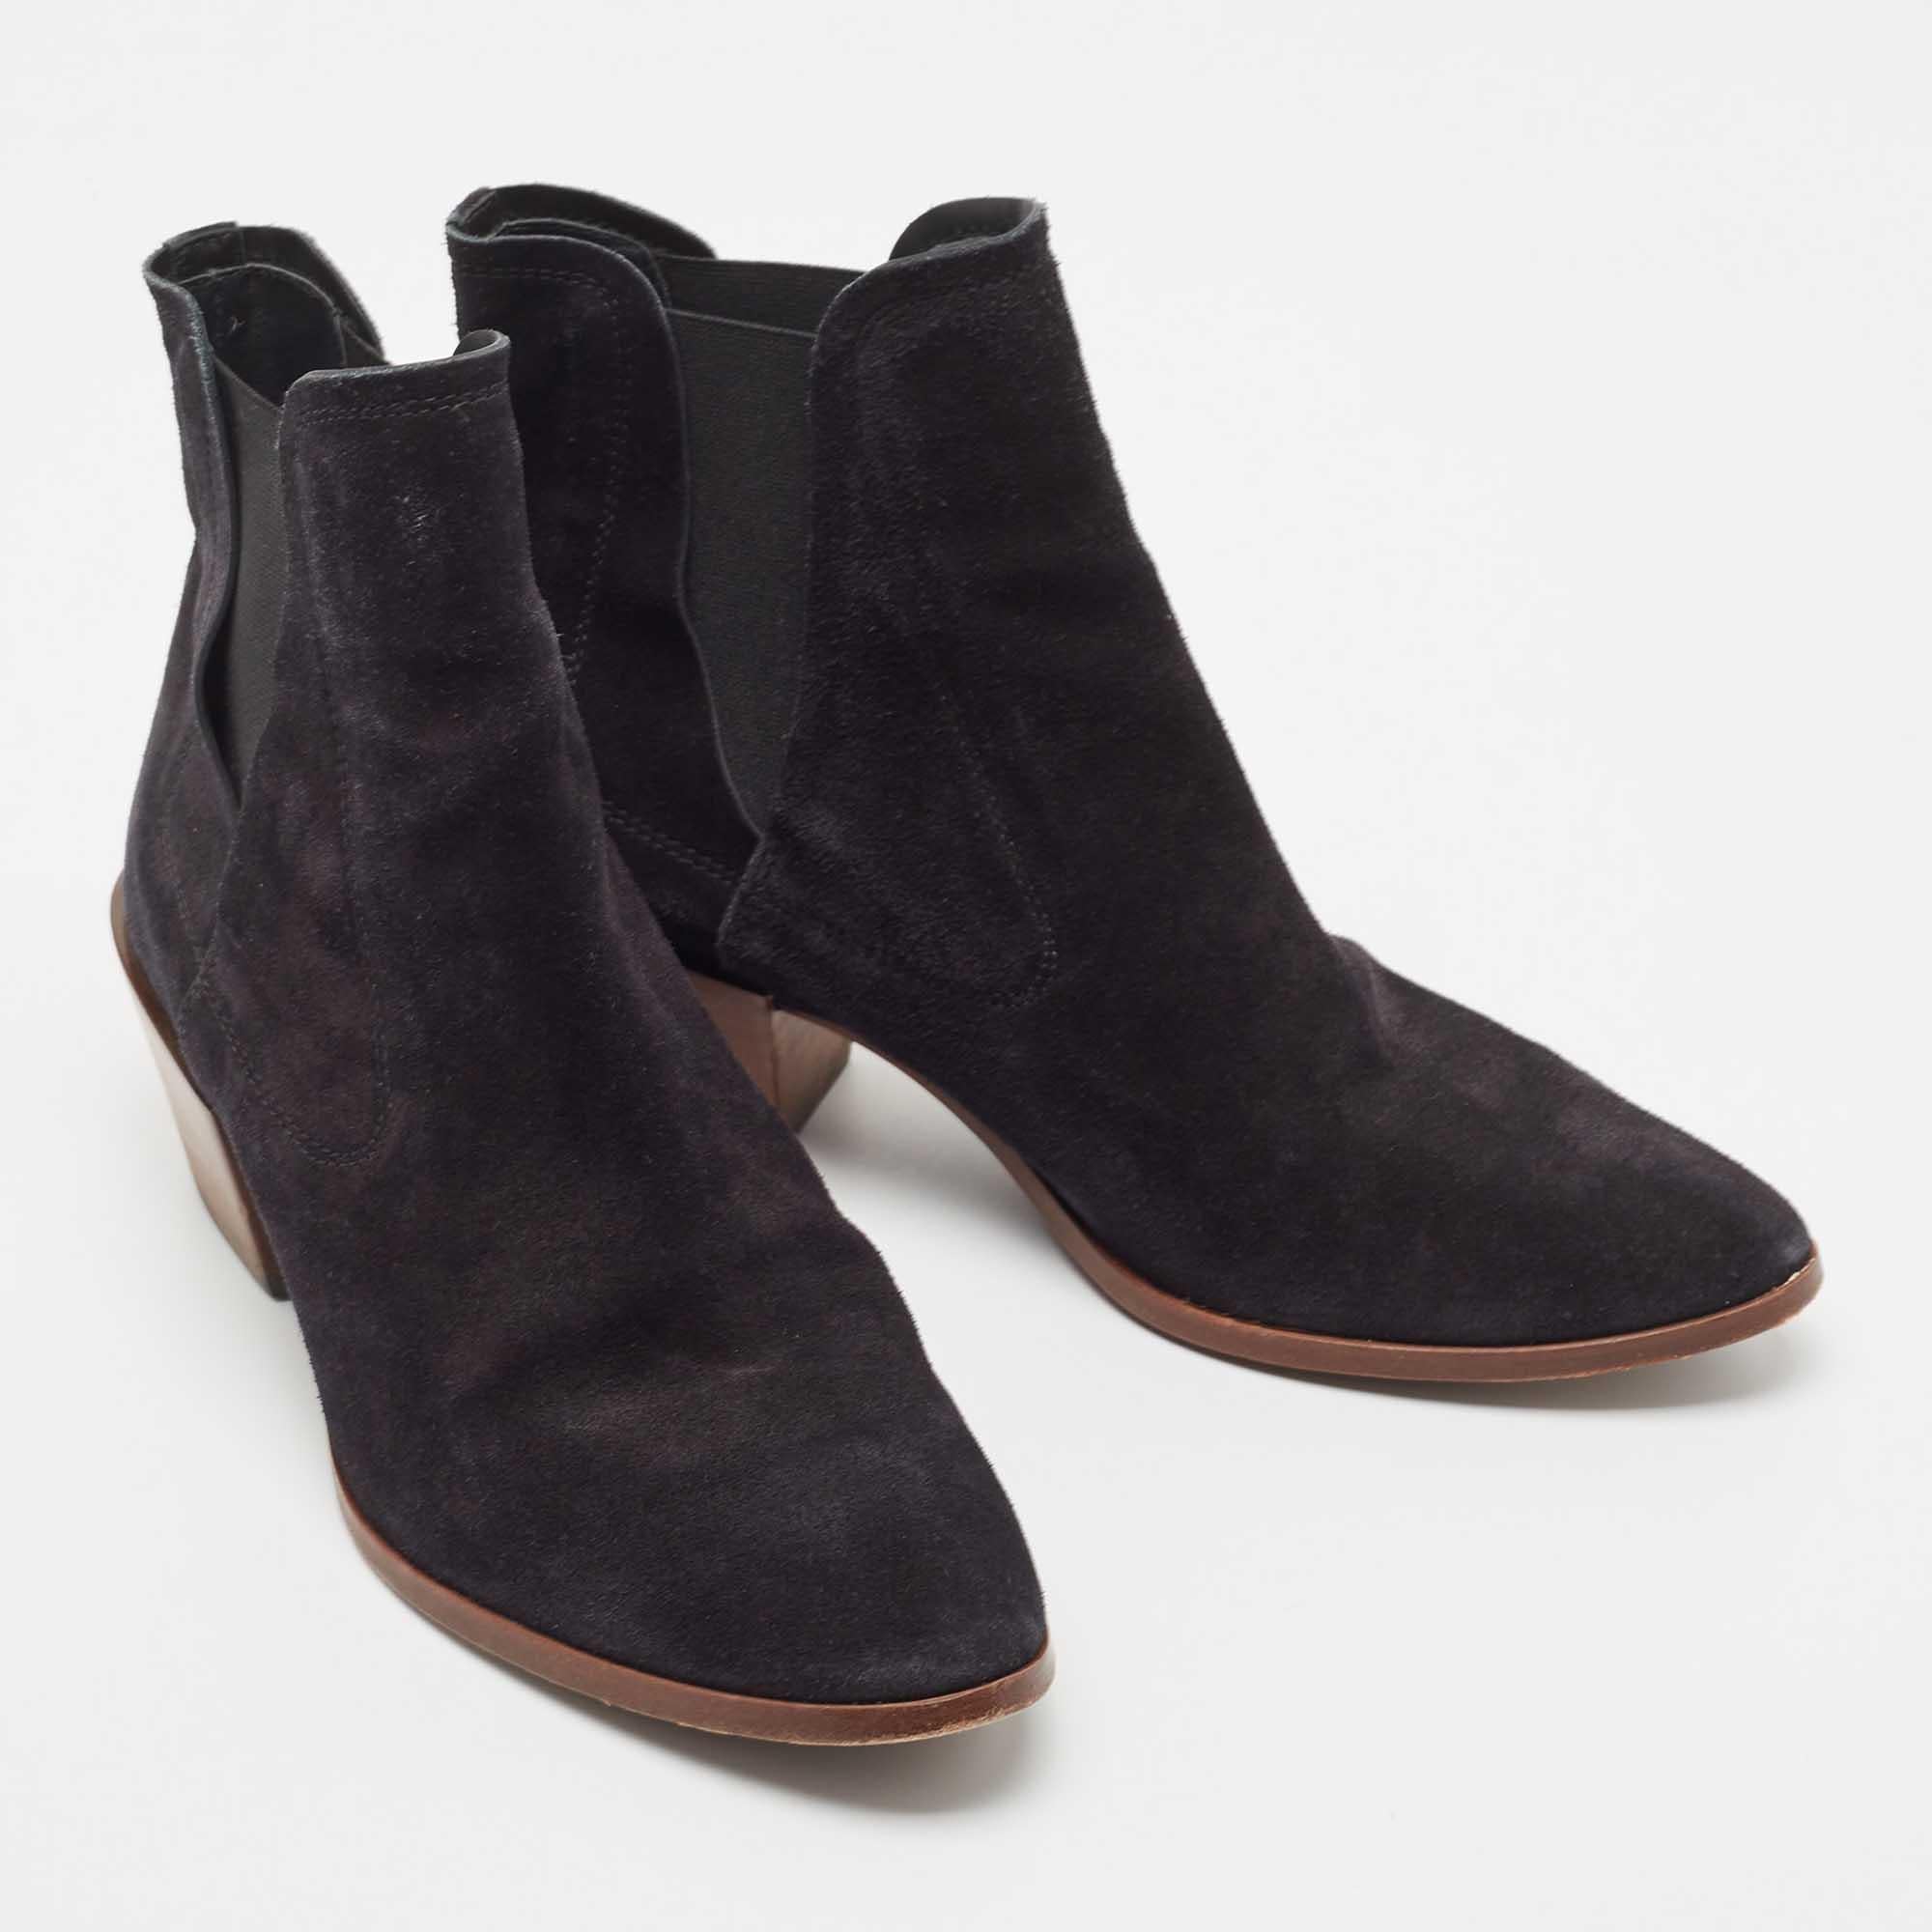 Tod's Black Suede Ankle Boots Size 39.5 In Good Condition For Sale In Dubai, Al Qouz 2